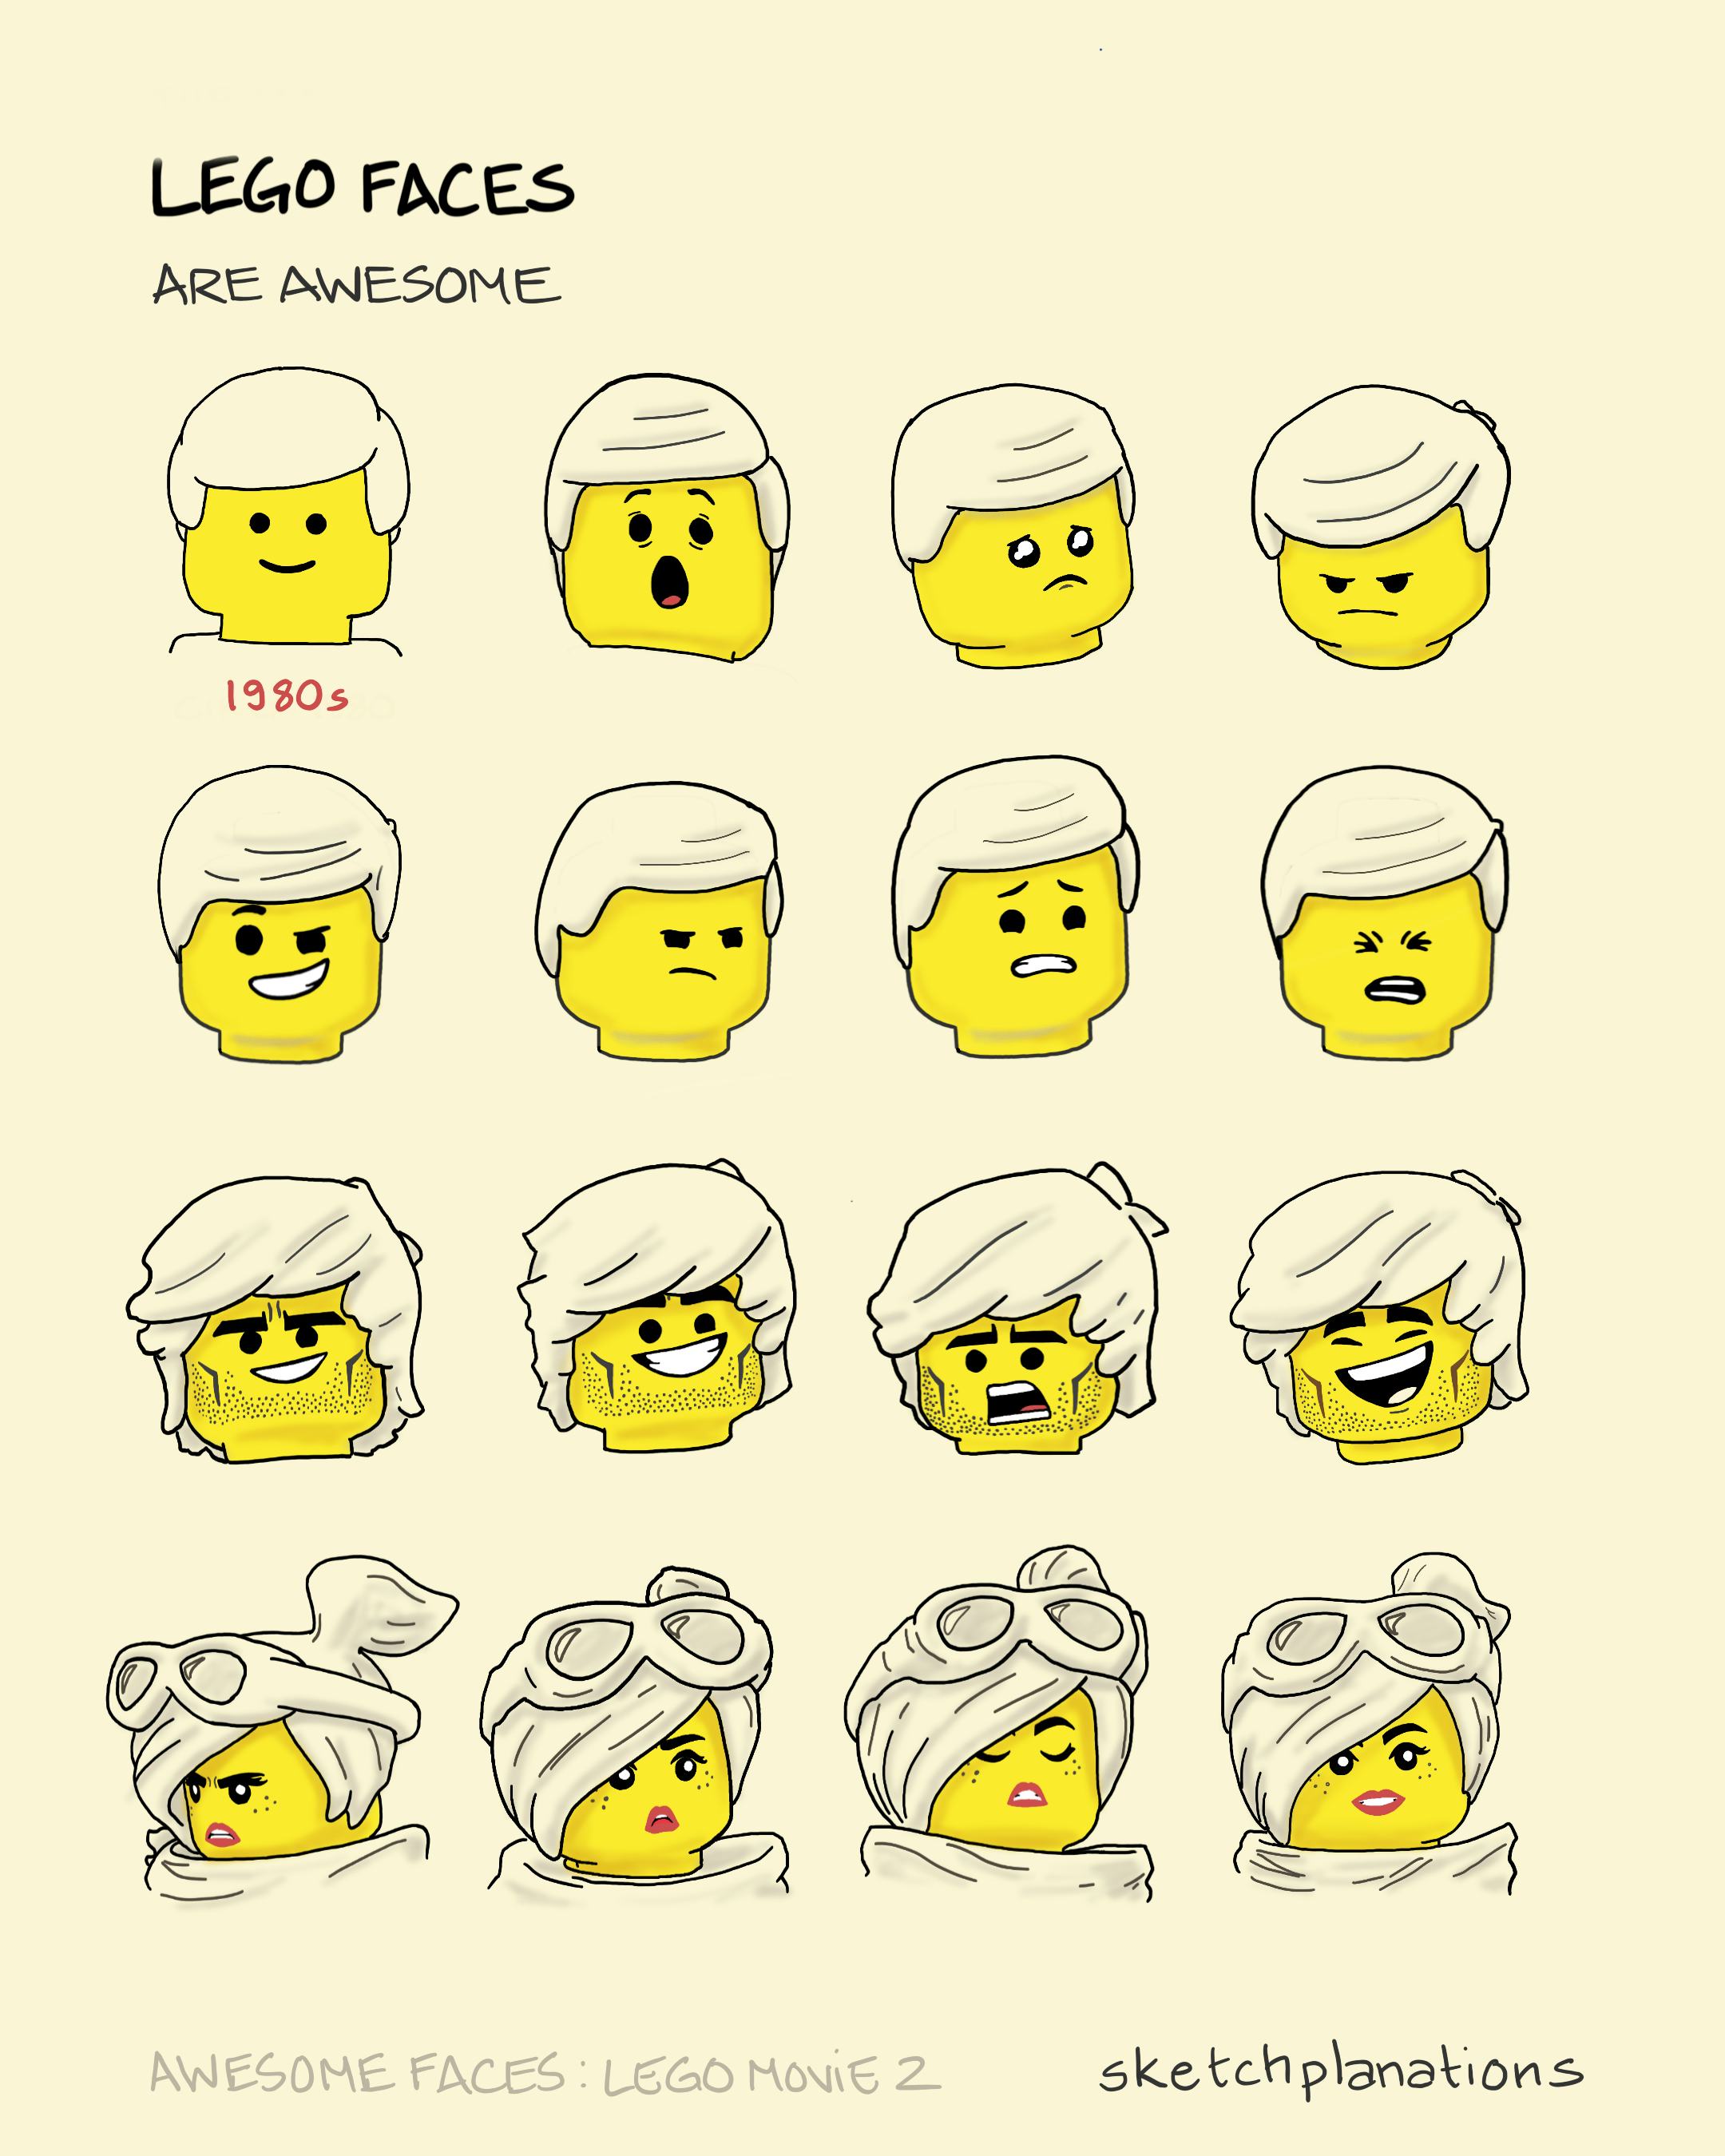 Lego faces are awesome: a comparison of the expressions on Lego faces from the Lego Movie 2 with one from the 1980s